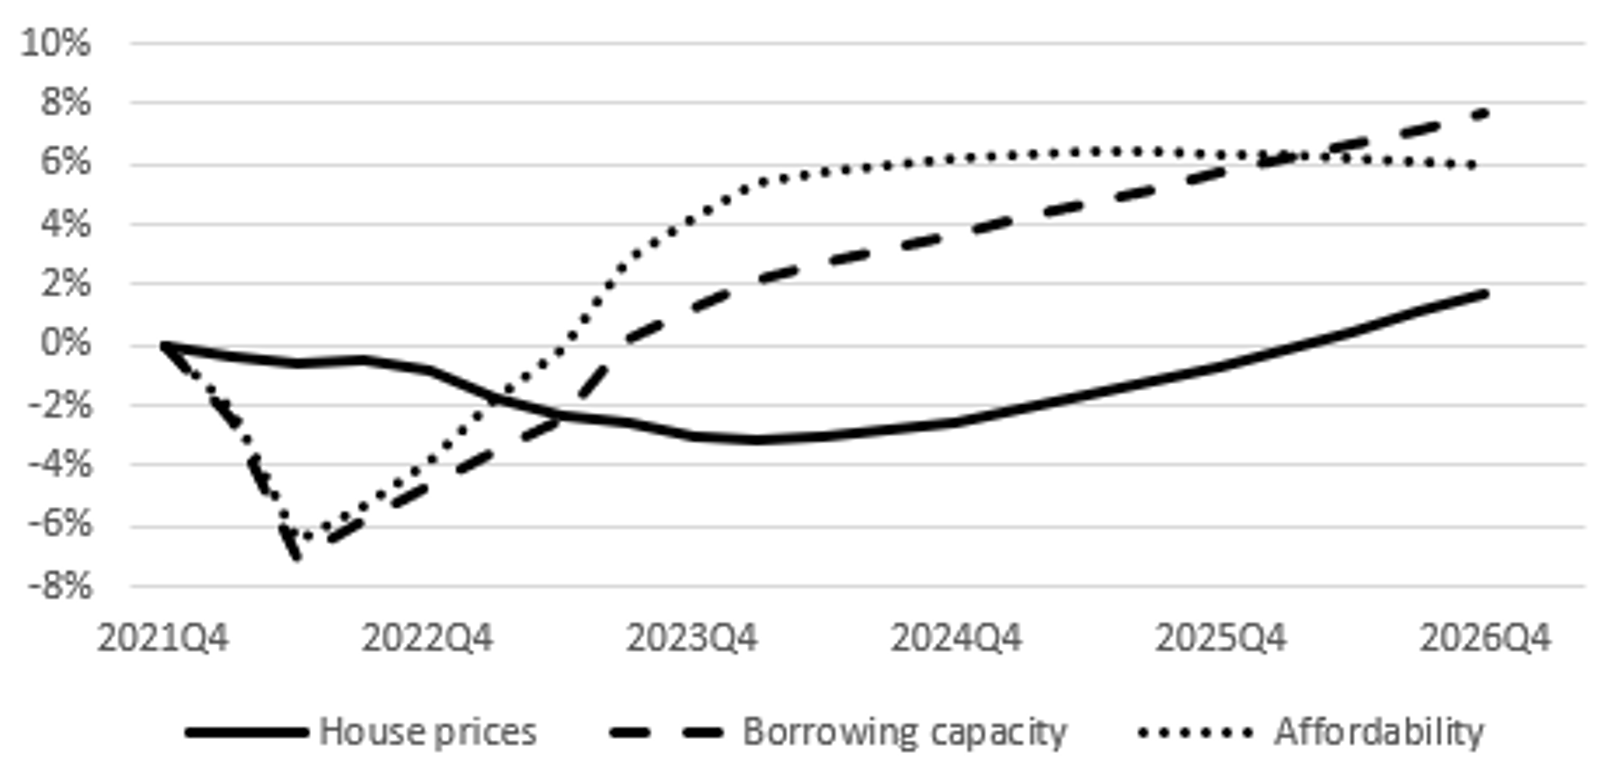 Figure 1: Borrowing capacity, house prices and affordability in a scenario of rising interest rates and rising wages. 